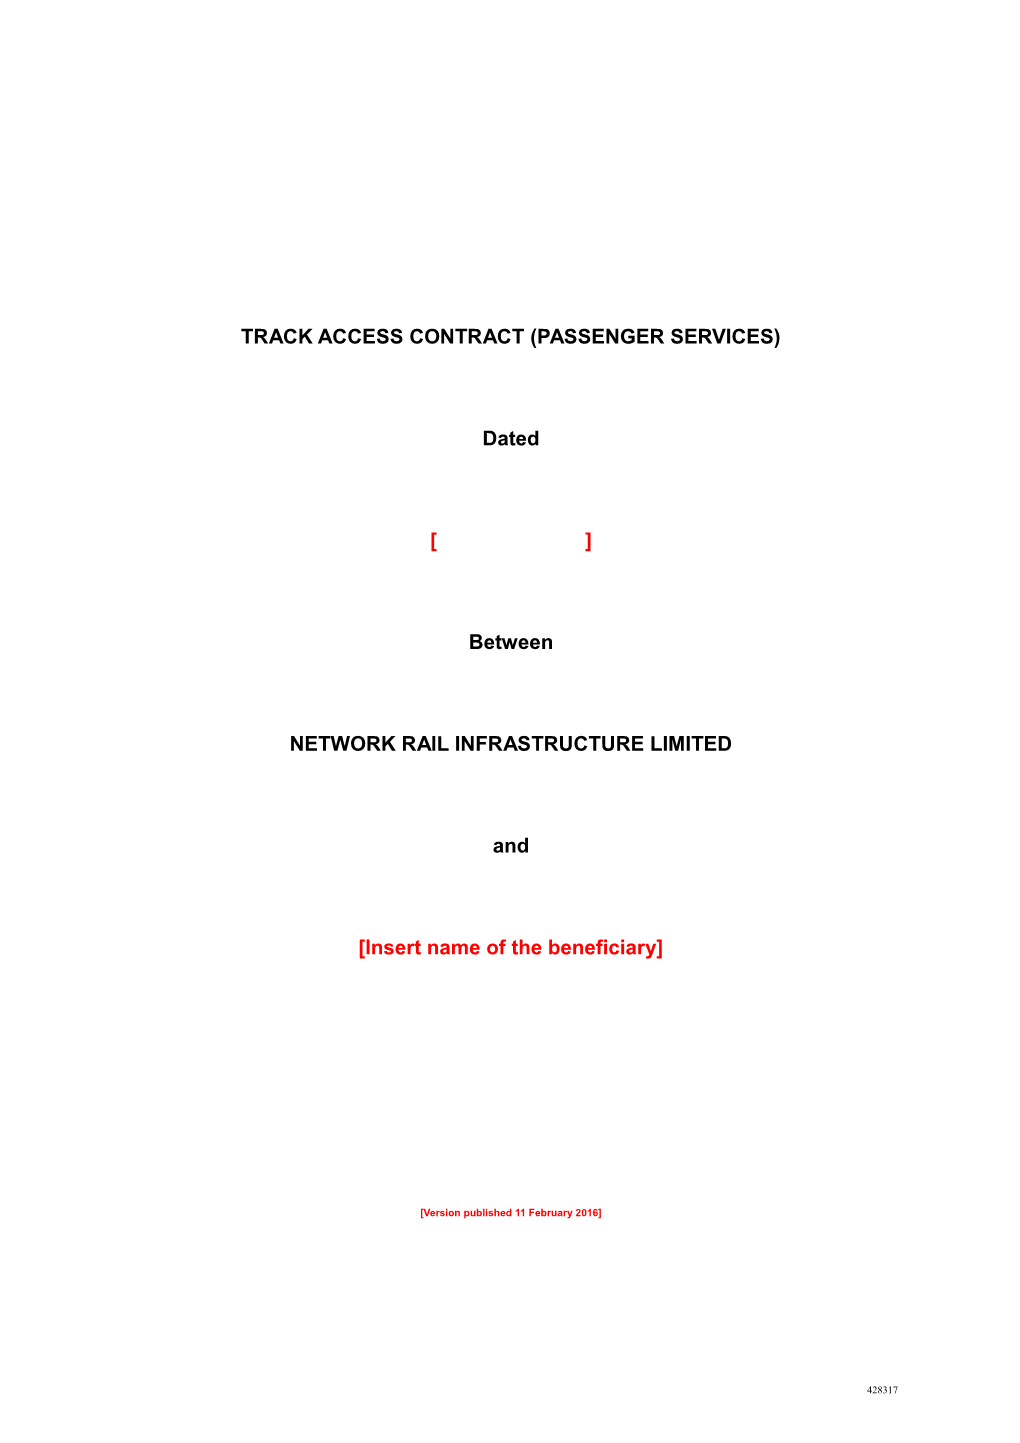 Track Access Passenger Model Contract - 11 February 2016